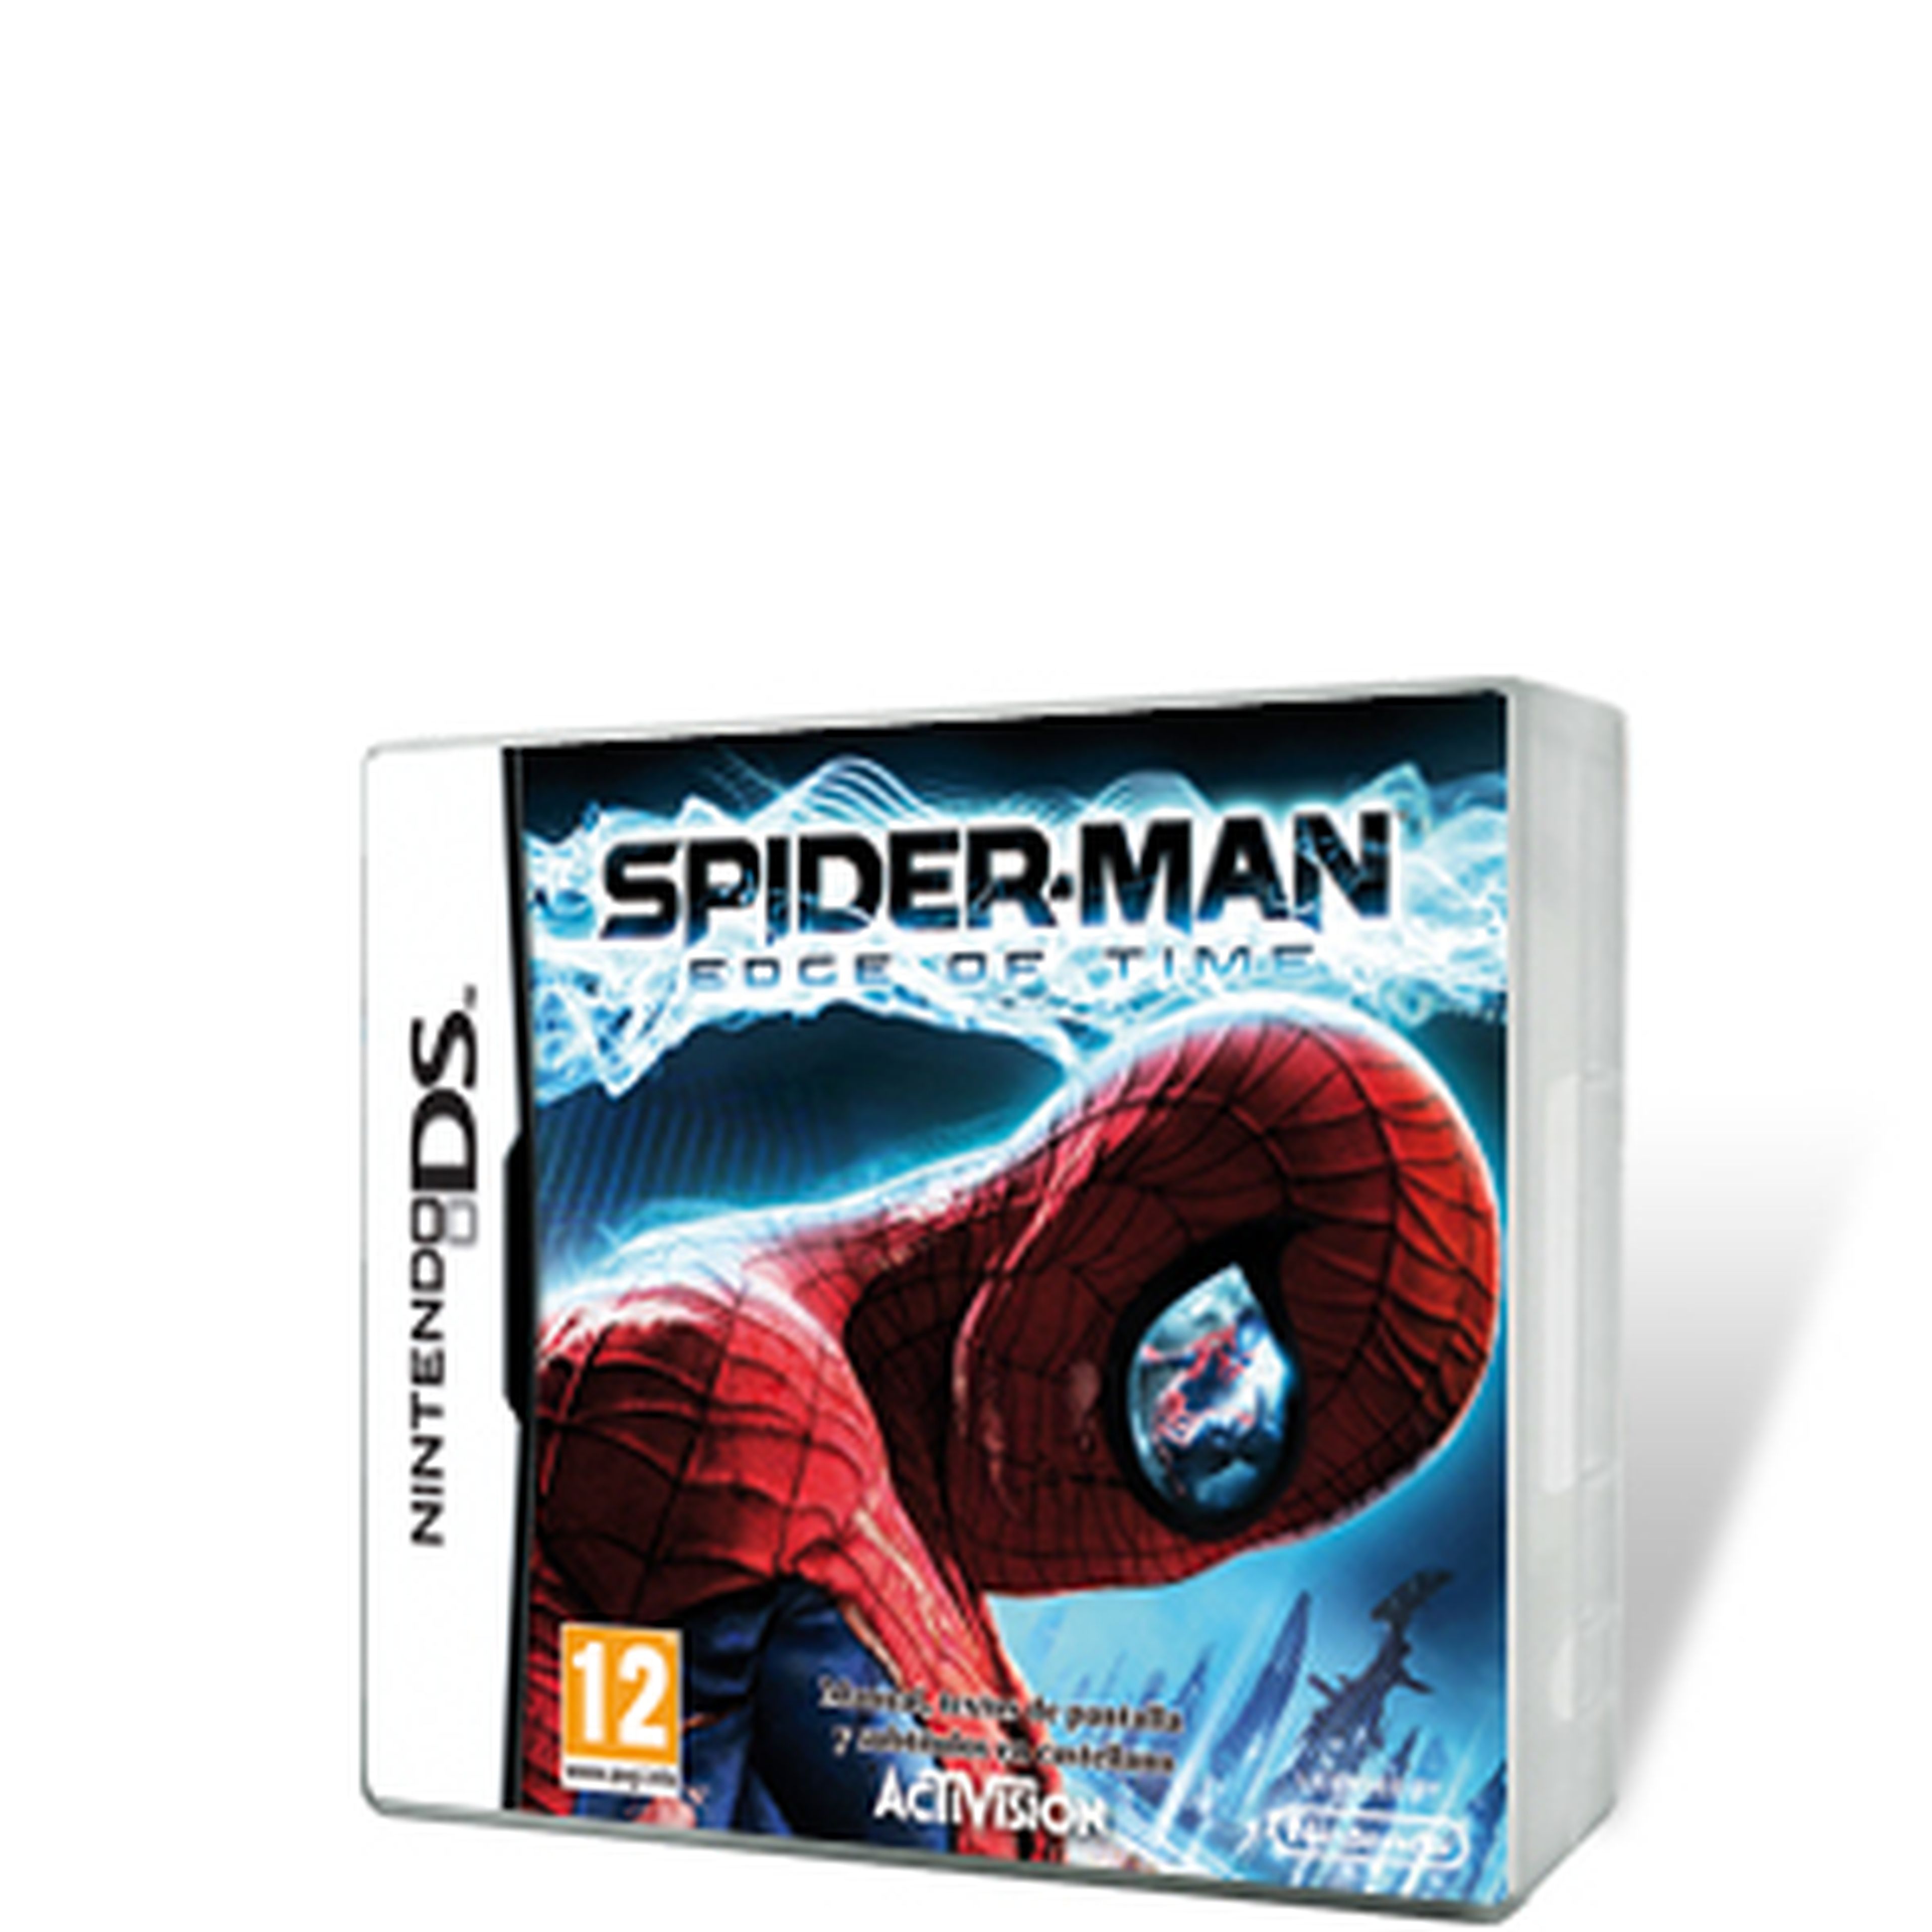 Spiderman Edge of Time para NDS